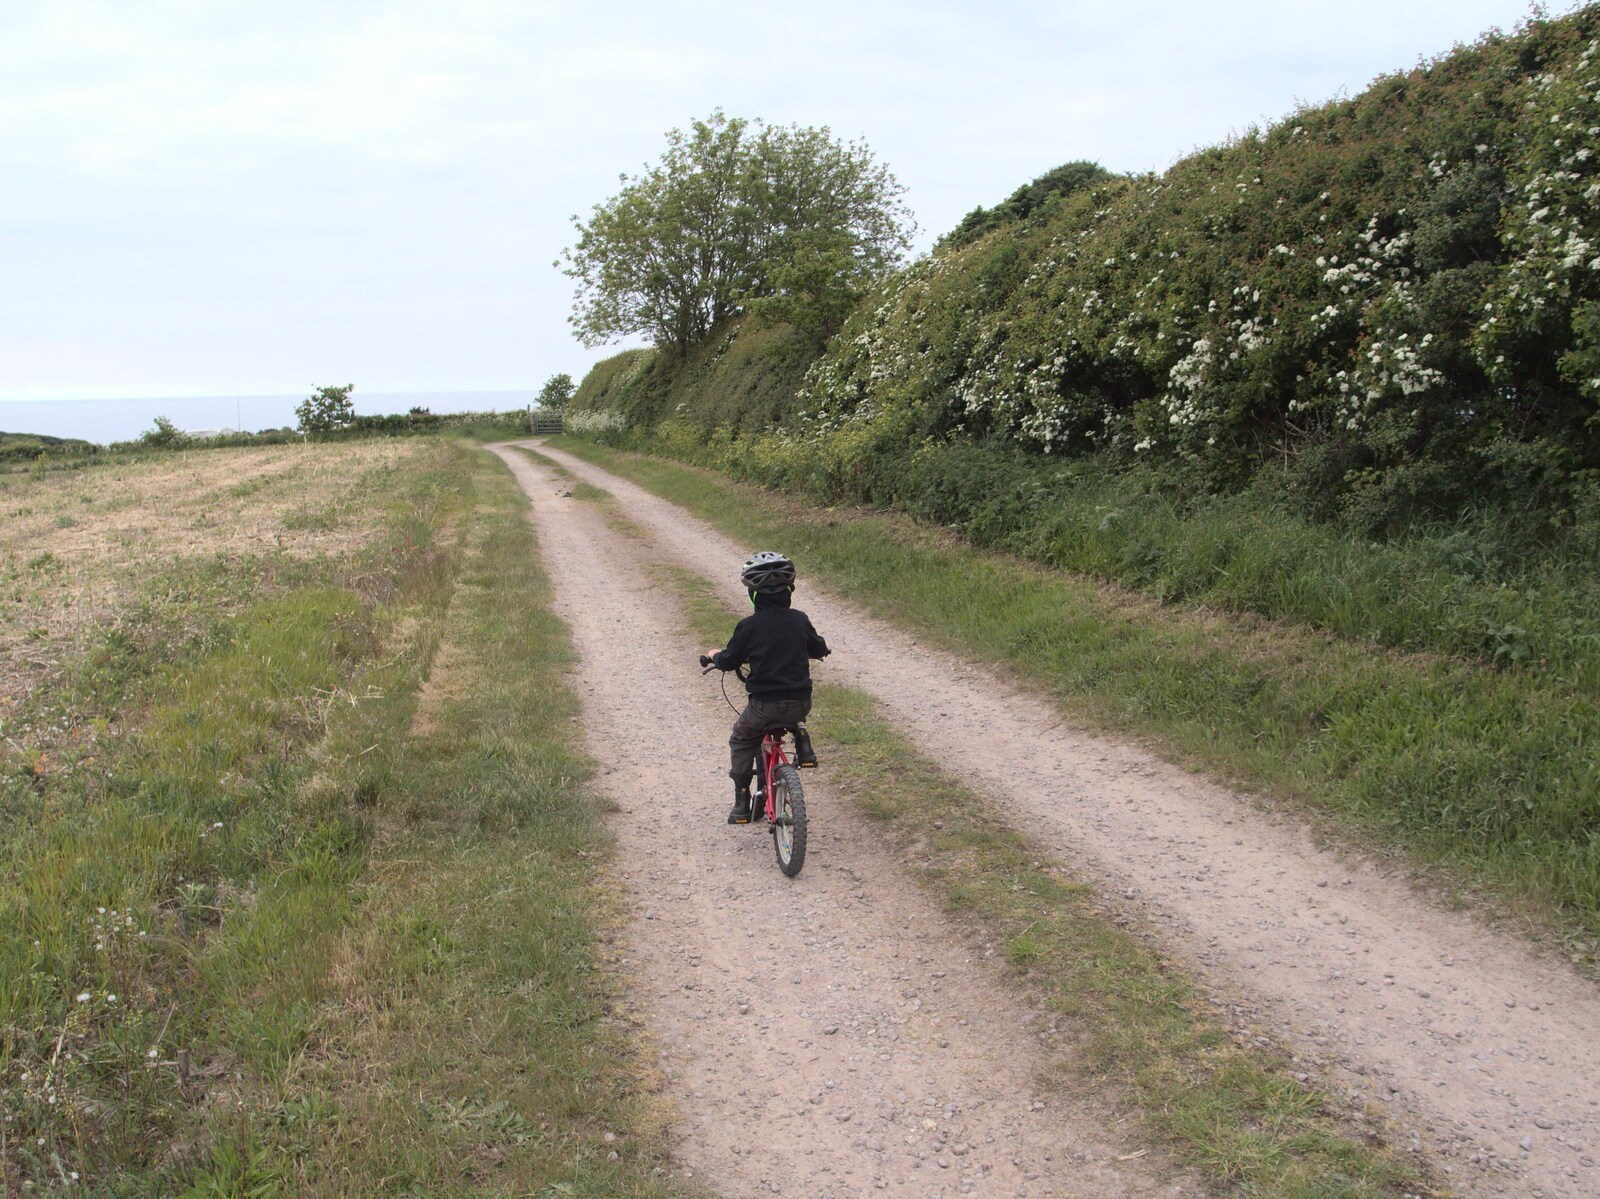 Fred cycles the path to the campsite from A Birthday Camping Trip, East Runton, North Norfolk - 26th May 2015